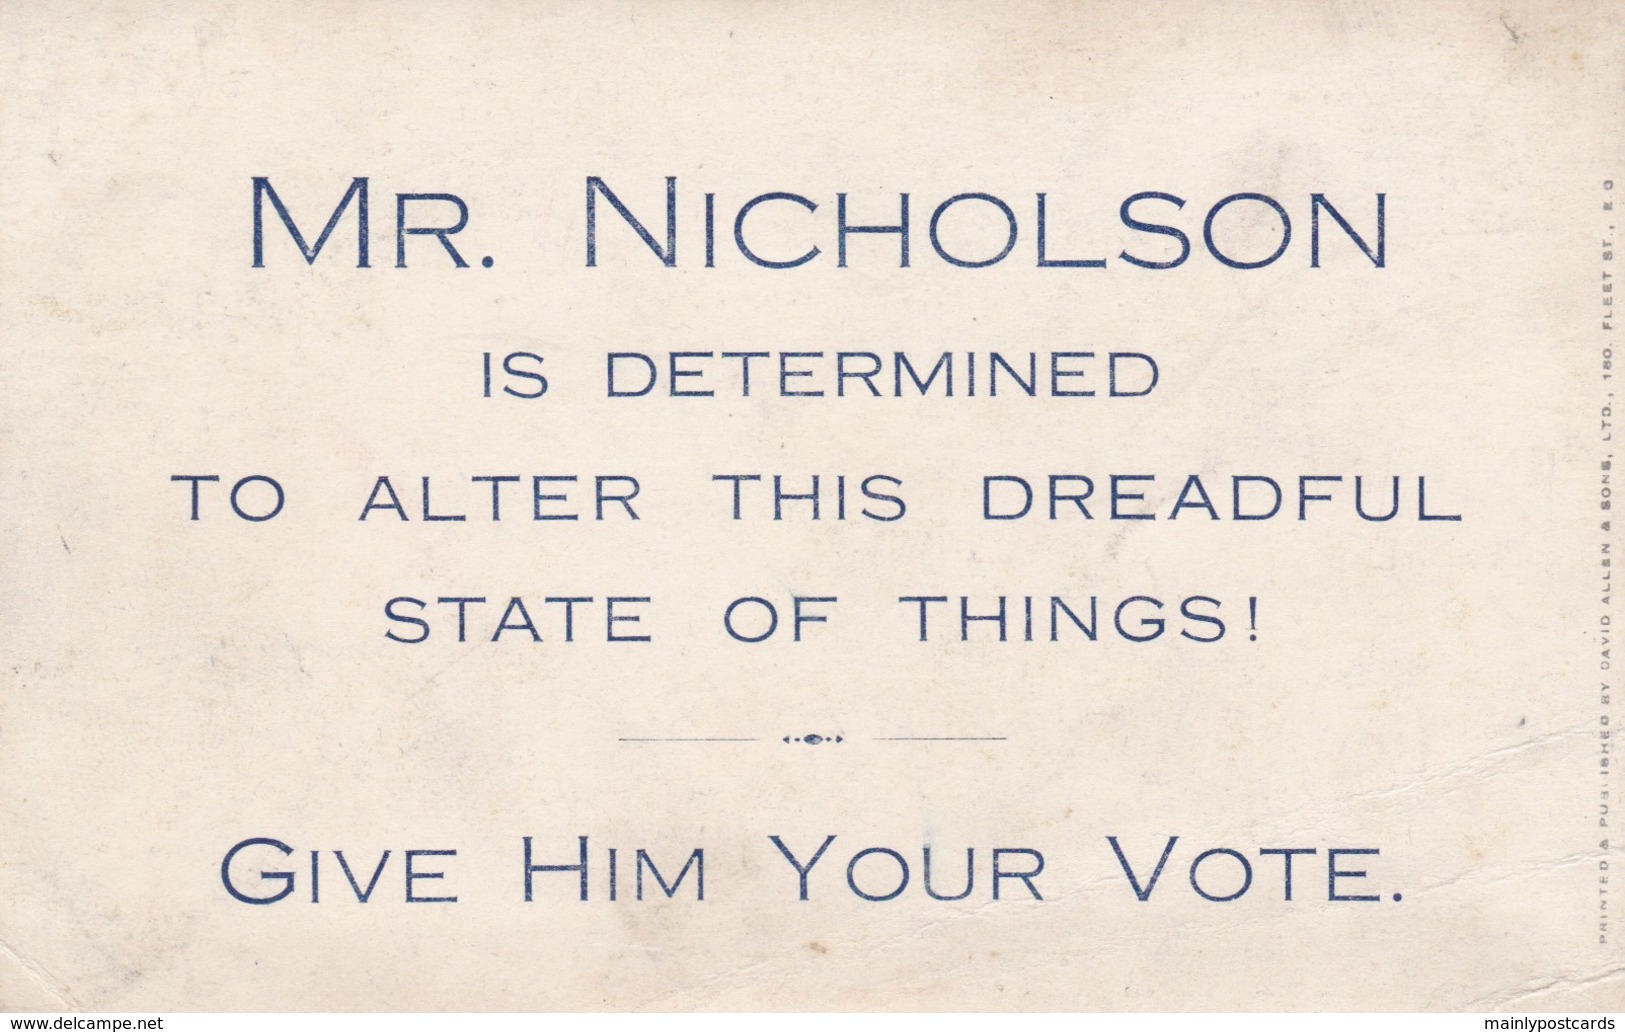 AO59 Politics - "Free Trade" - Vote For Mr. Nicholson - Political Parties & Elections